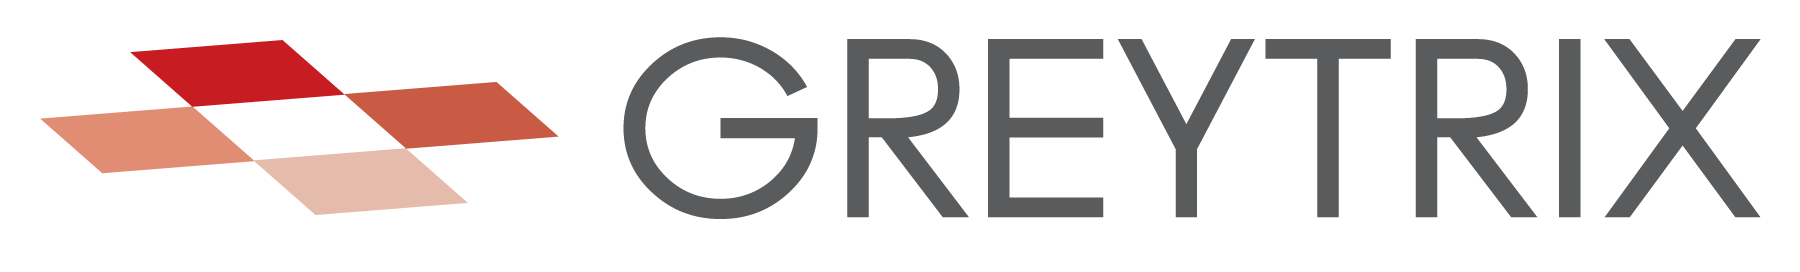 Greytrix India Private Limited - Checkbook.io ACH/Digital Check Payments